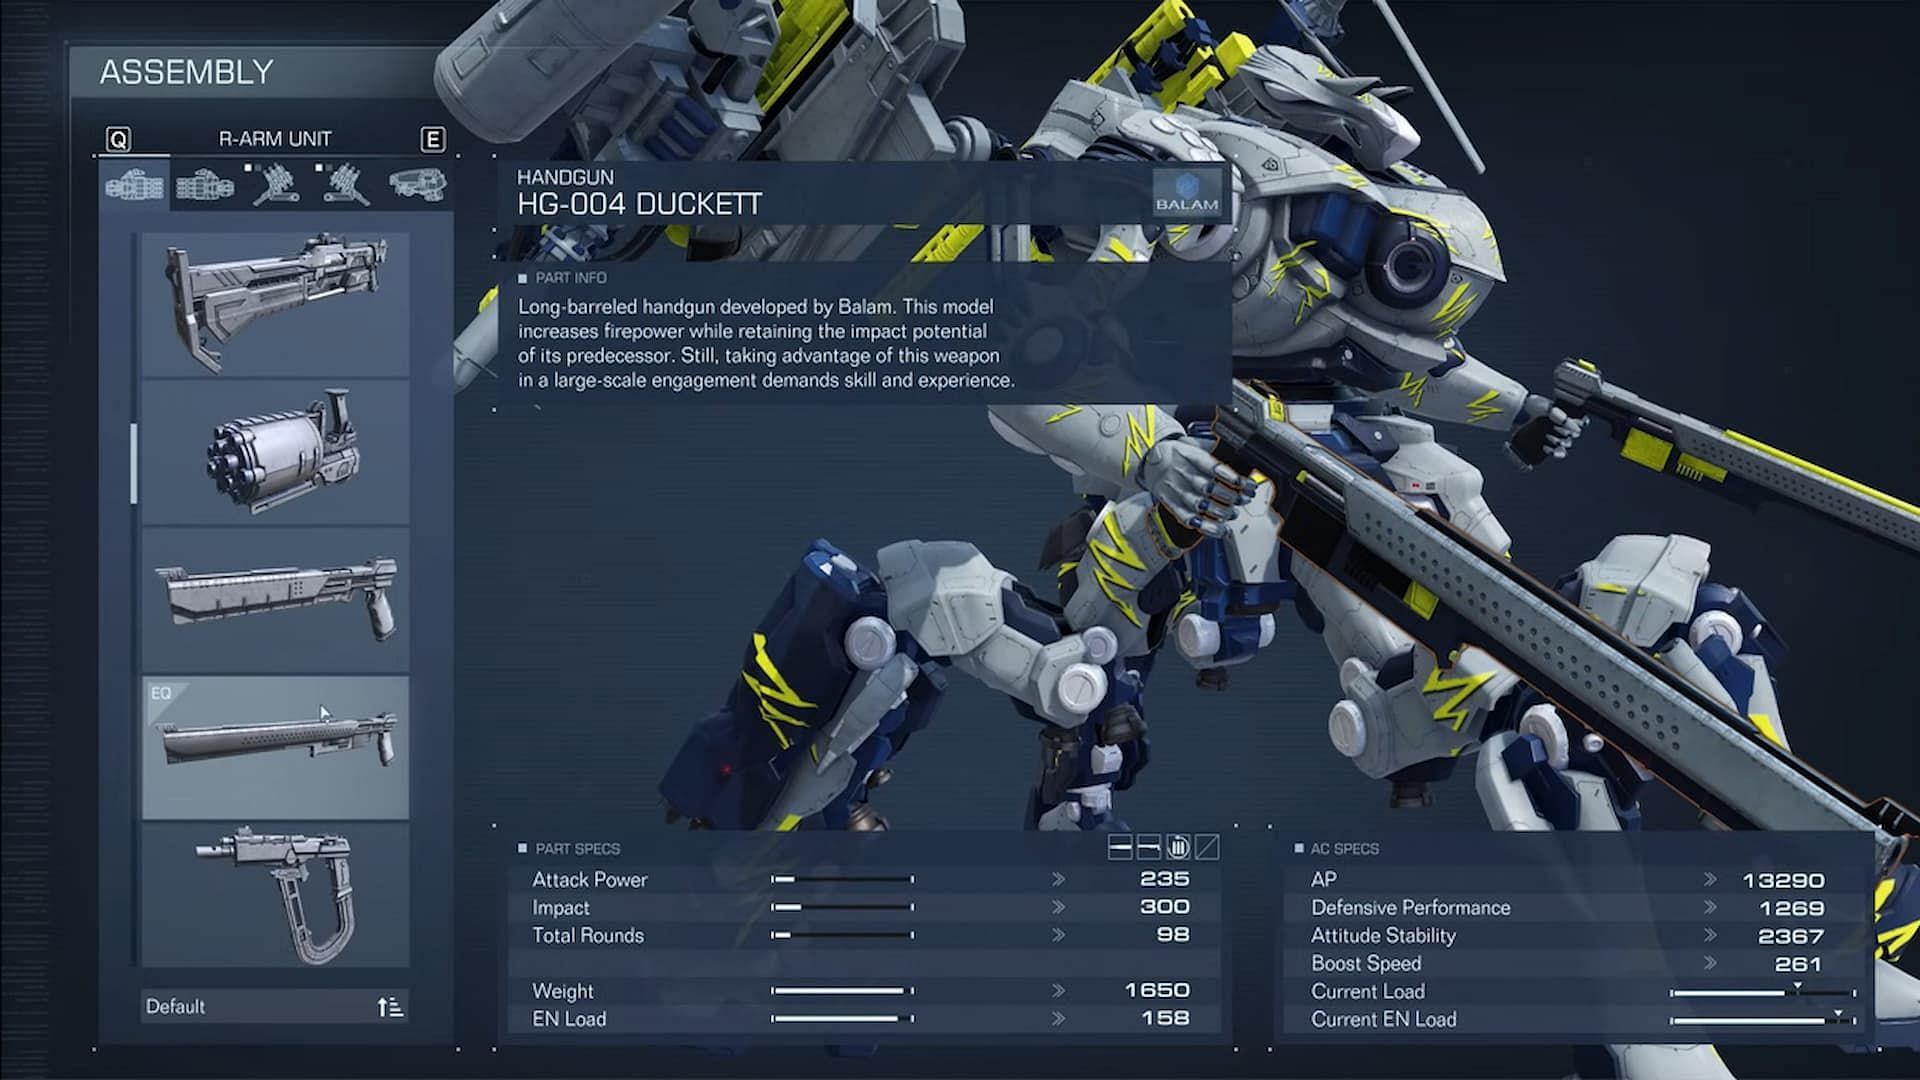 The DUCKETT handgun is suitable for this Armored Core 6 tetrapod build (Image via FromSoftware)